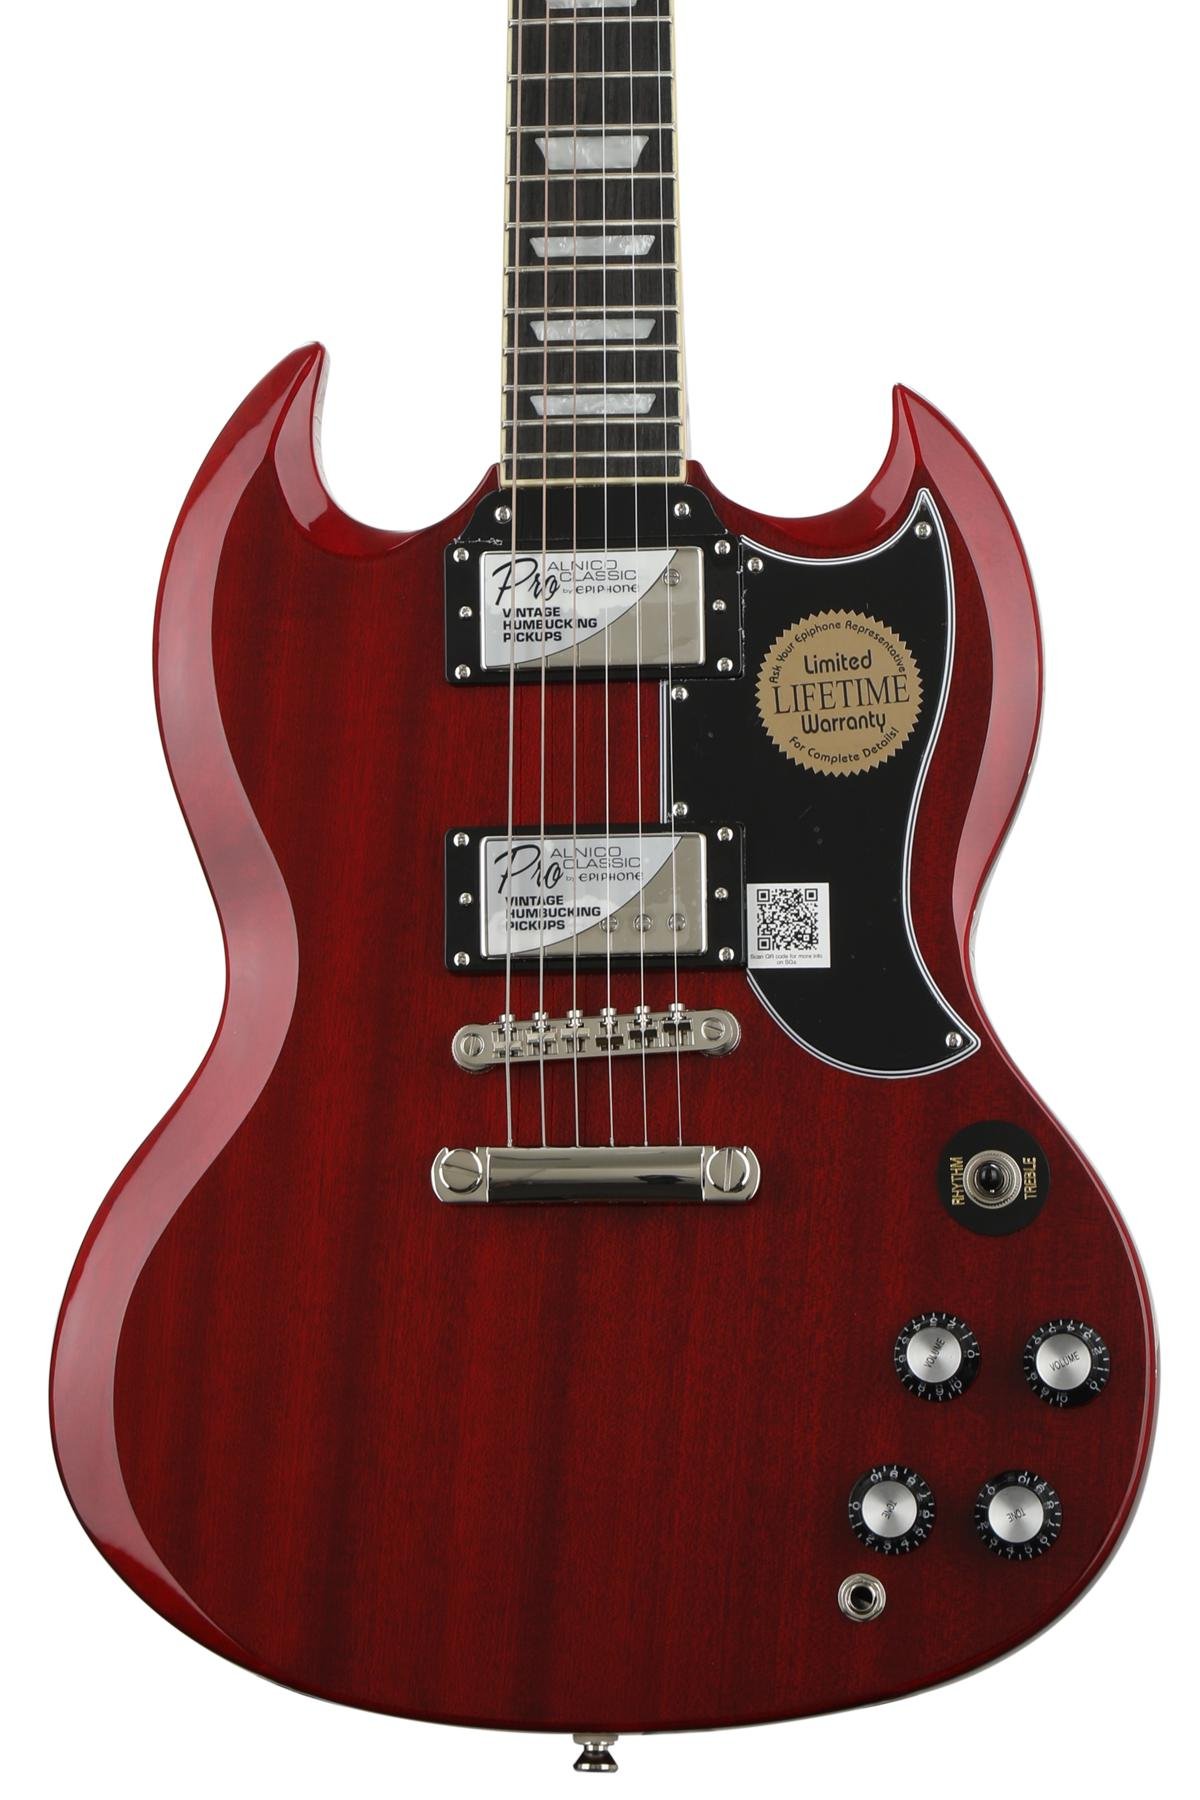 Epiphone G-400 Pro SG - Cherry | Sweetwater